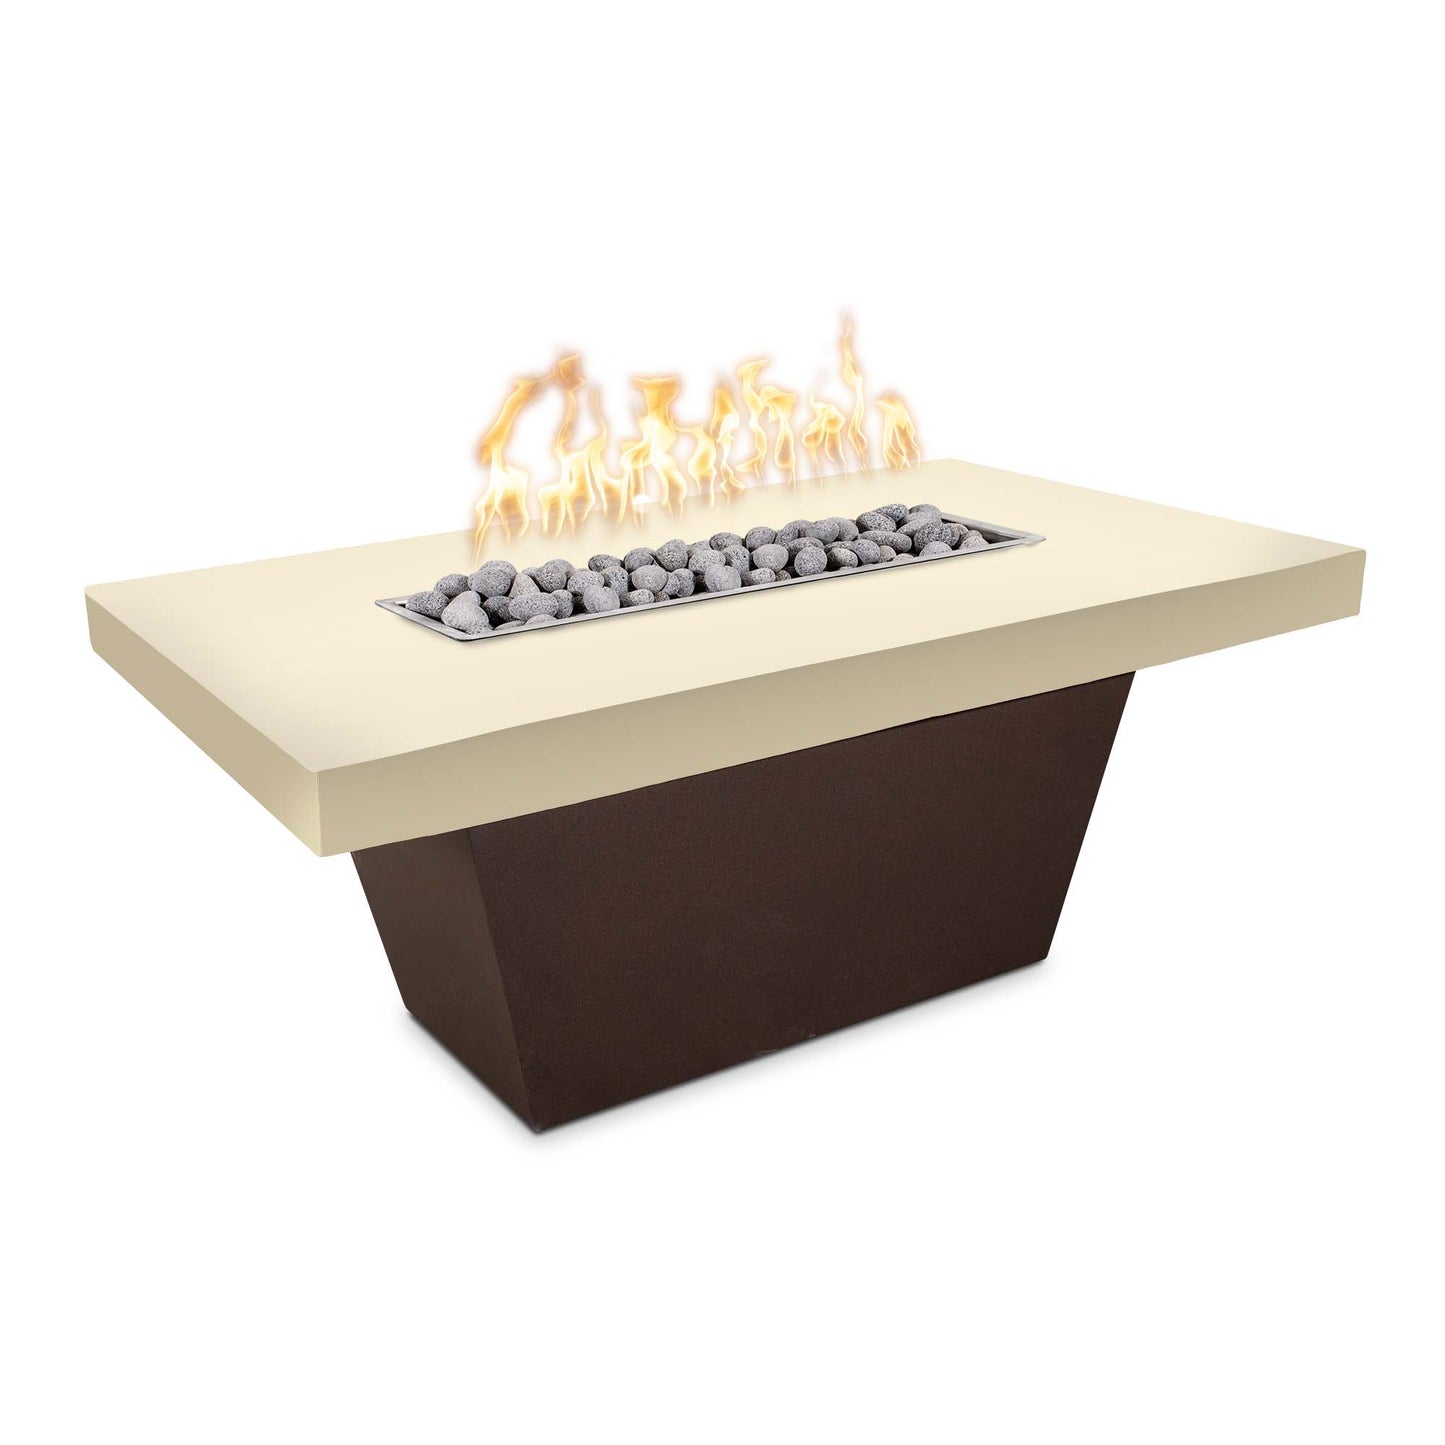 The Outdoor Plus Tacoma 48" Black Concrete Top & White Powder Coated Base Natural Gas Fire Table with Match Lit Ignition